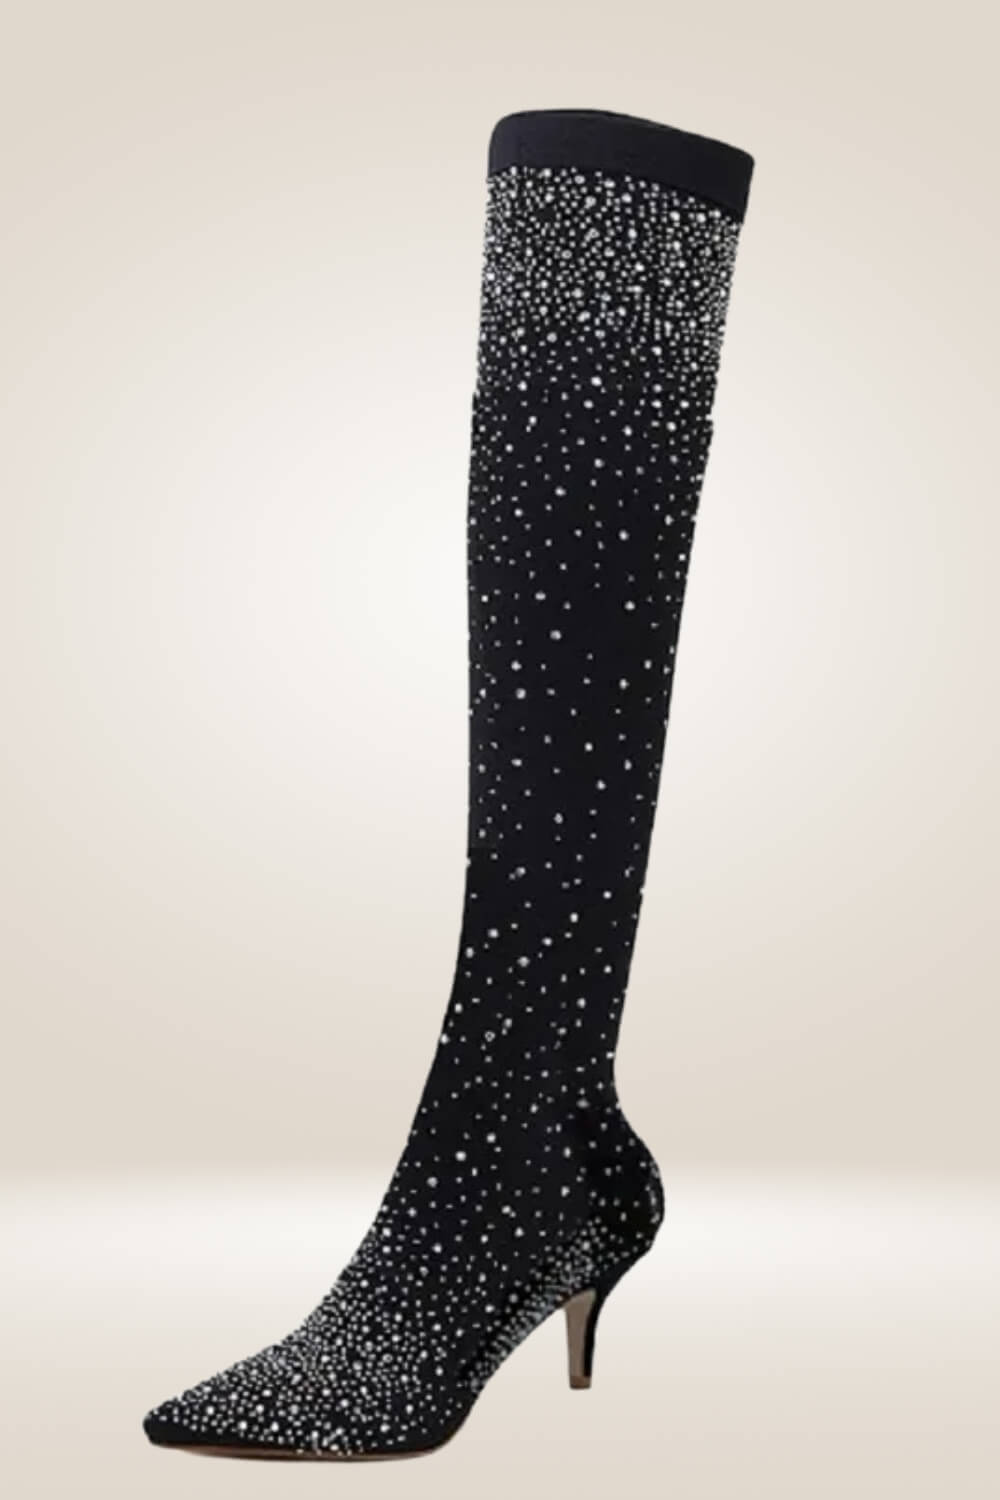 Glitter High Heels Black Over The Knee Boots - TGC Boutique - Boots